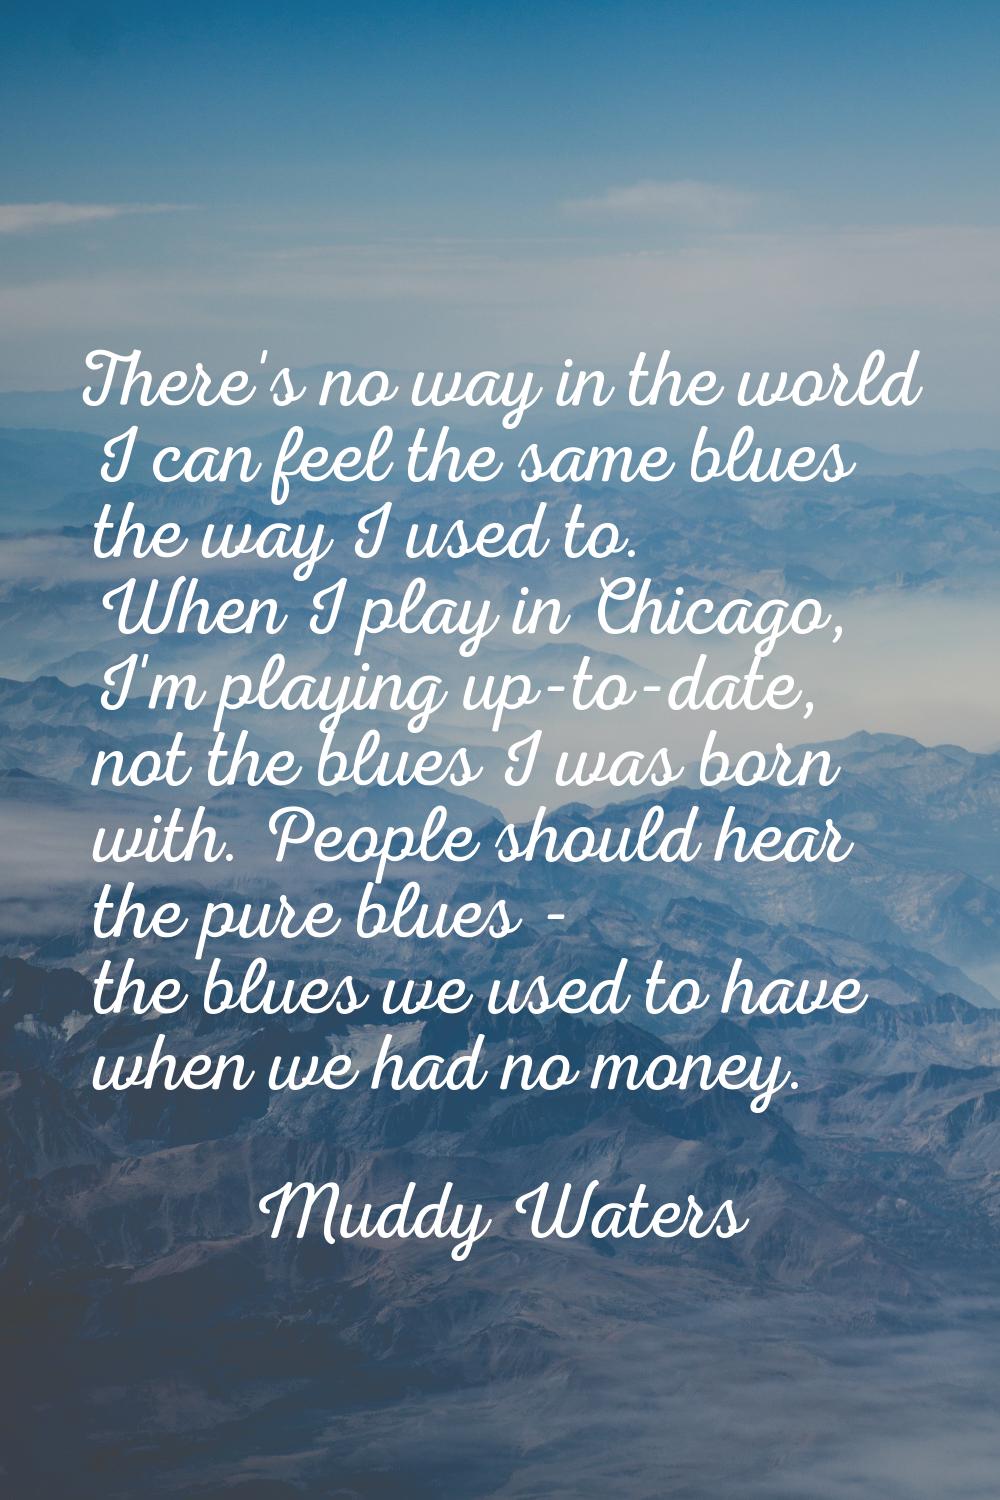 There's no way in the world I can feel the same blues the way I used to. When I play in Chicago, I'